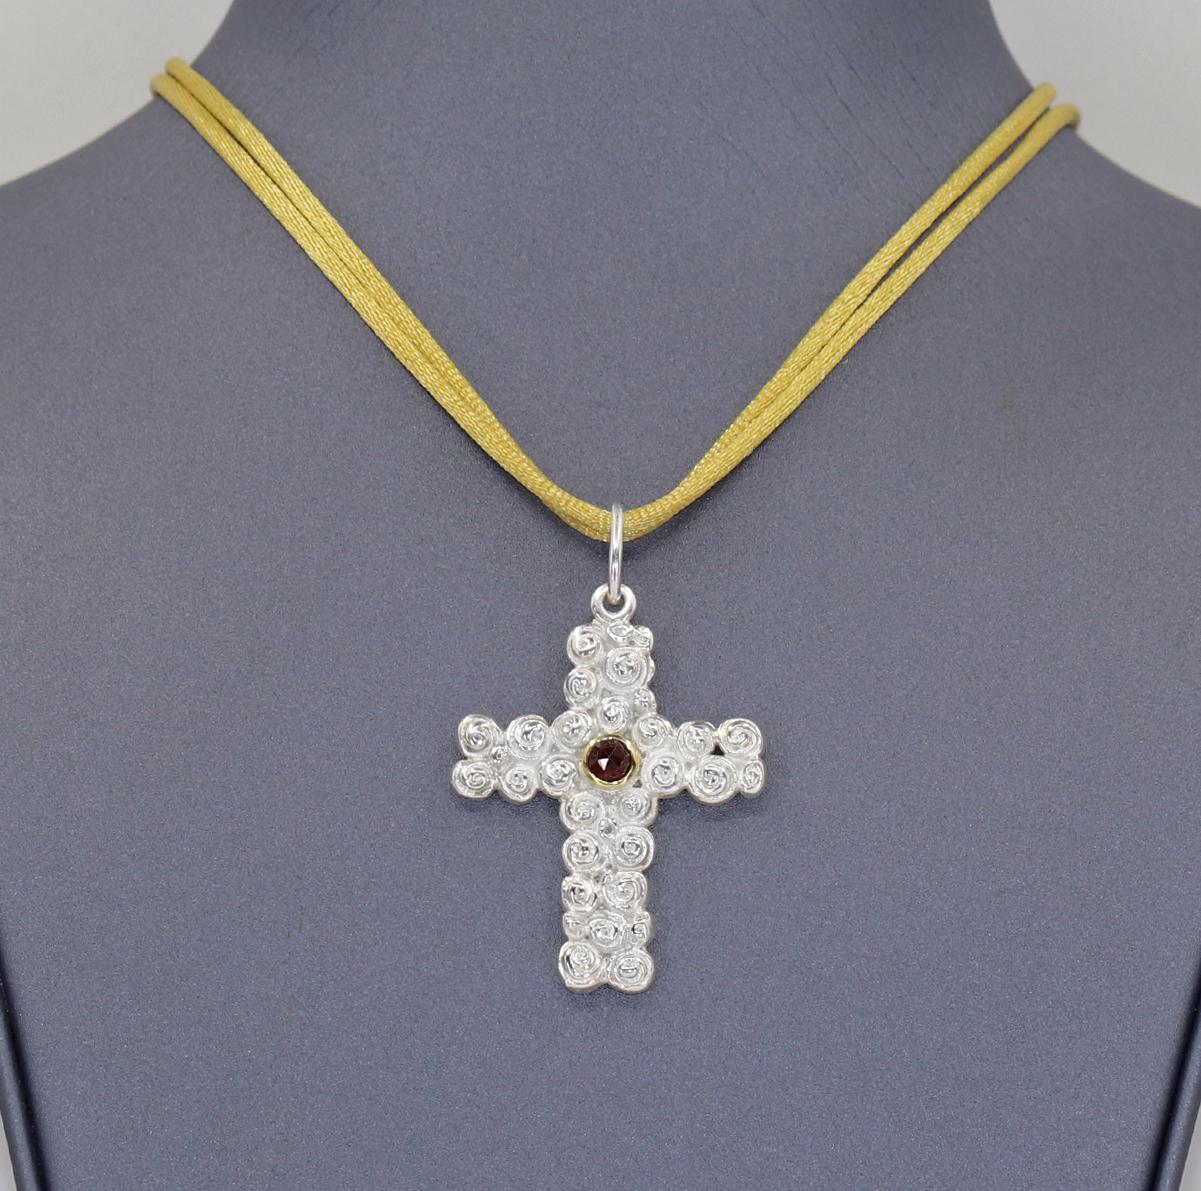 Rose Cross Pendant Necklace handcrafted in Germany by jewelry maker Gitta Pielcke in bright sterling silver with a faceted red garnet set in an 18k yellow gold bezel. Pendant accompanied with multiple neck cords in assorted colors. Stamped and